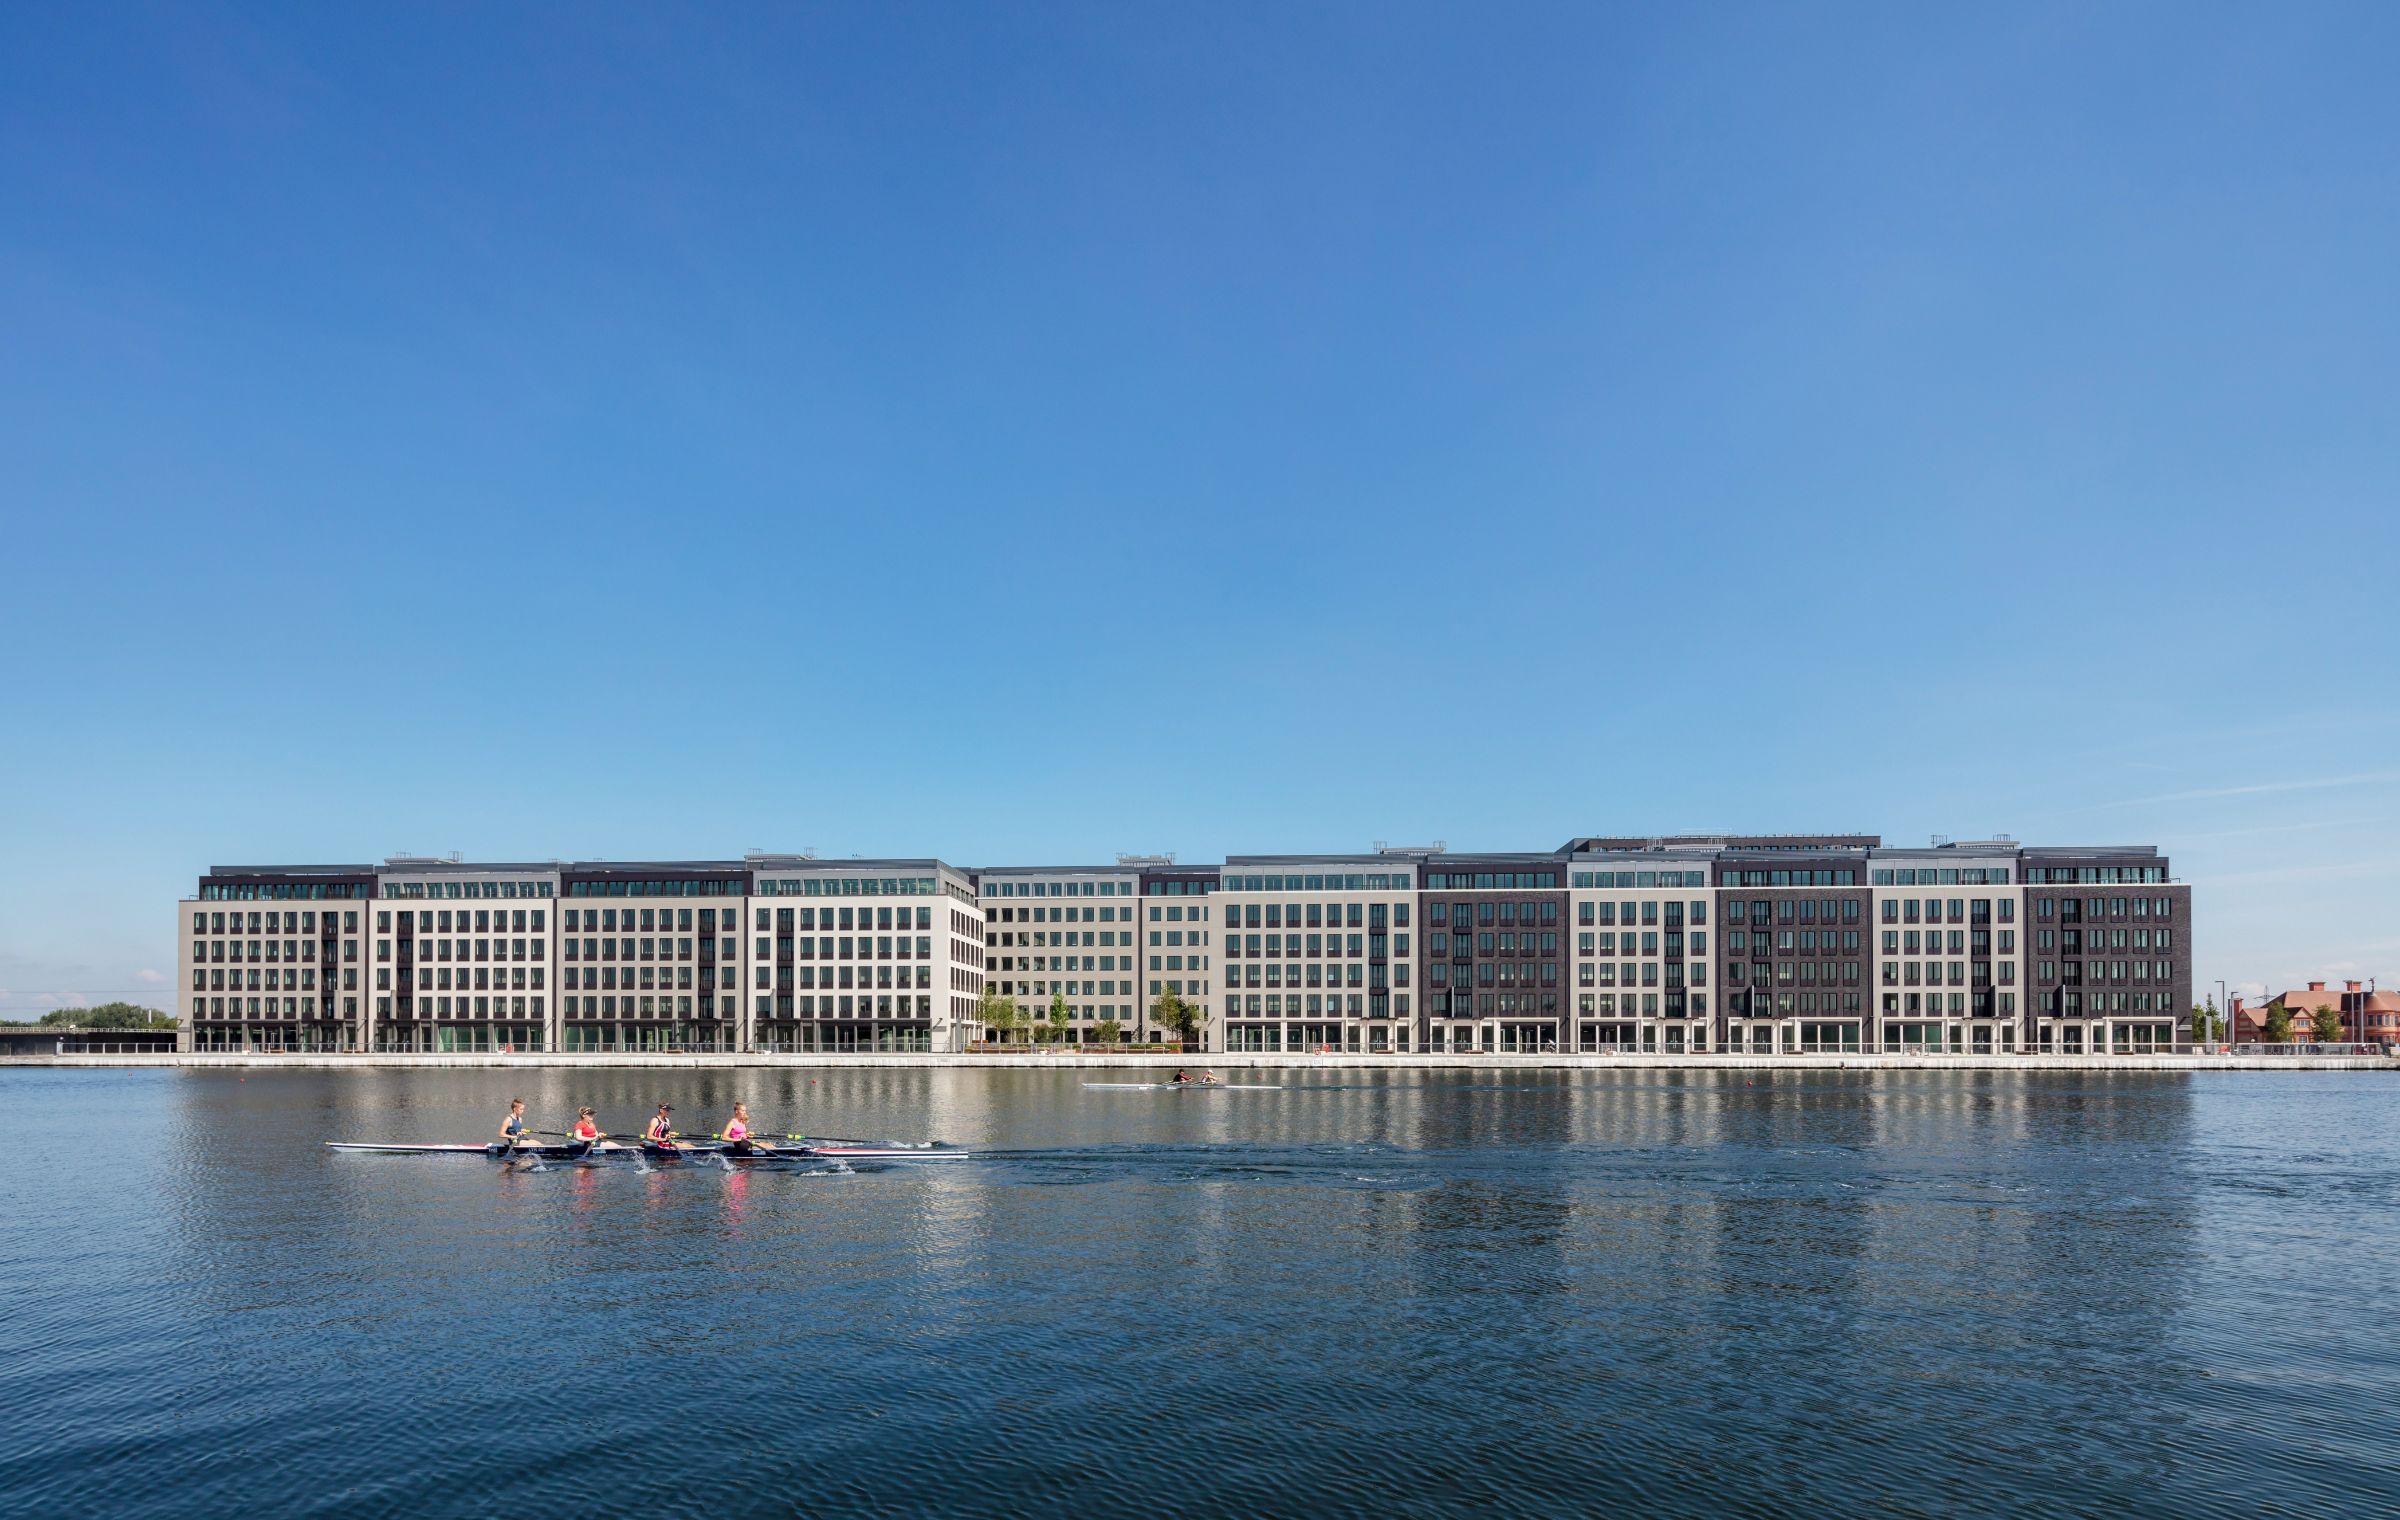 Developments along the Royal Dock with canoeists paddling past